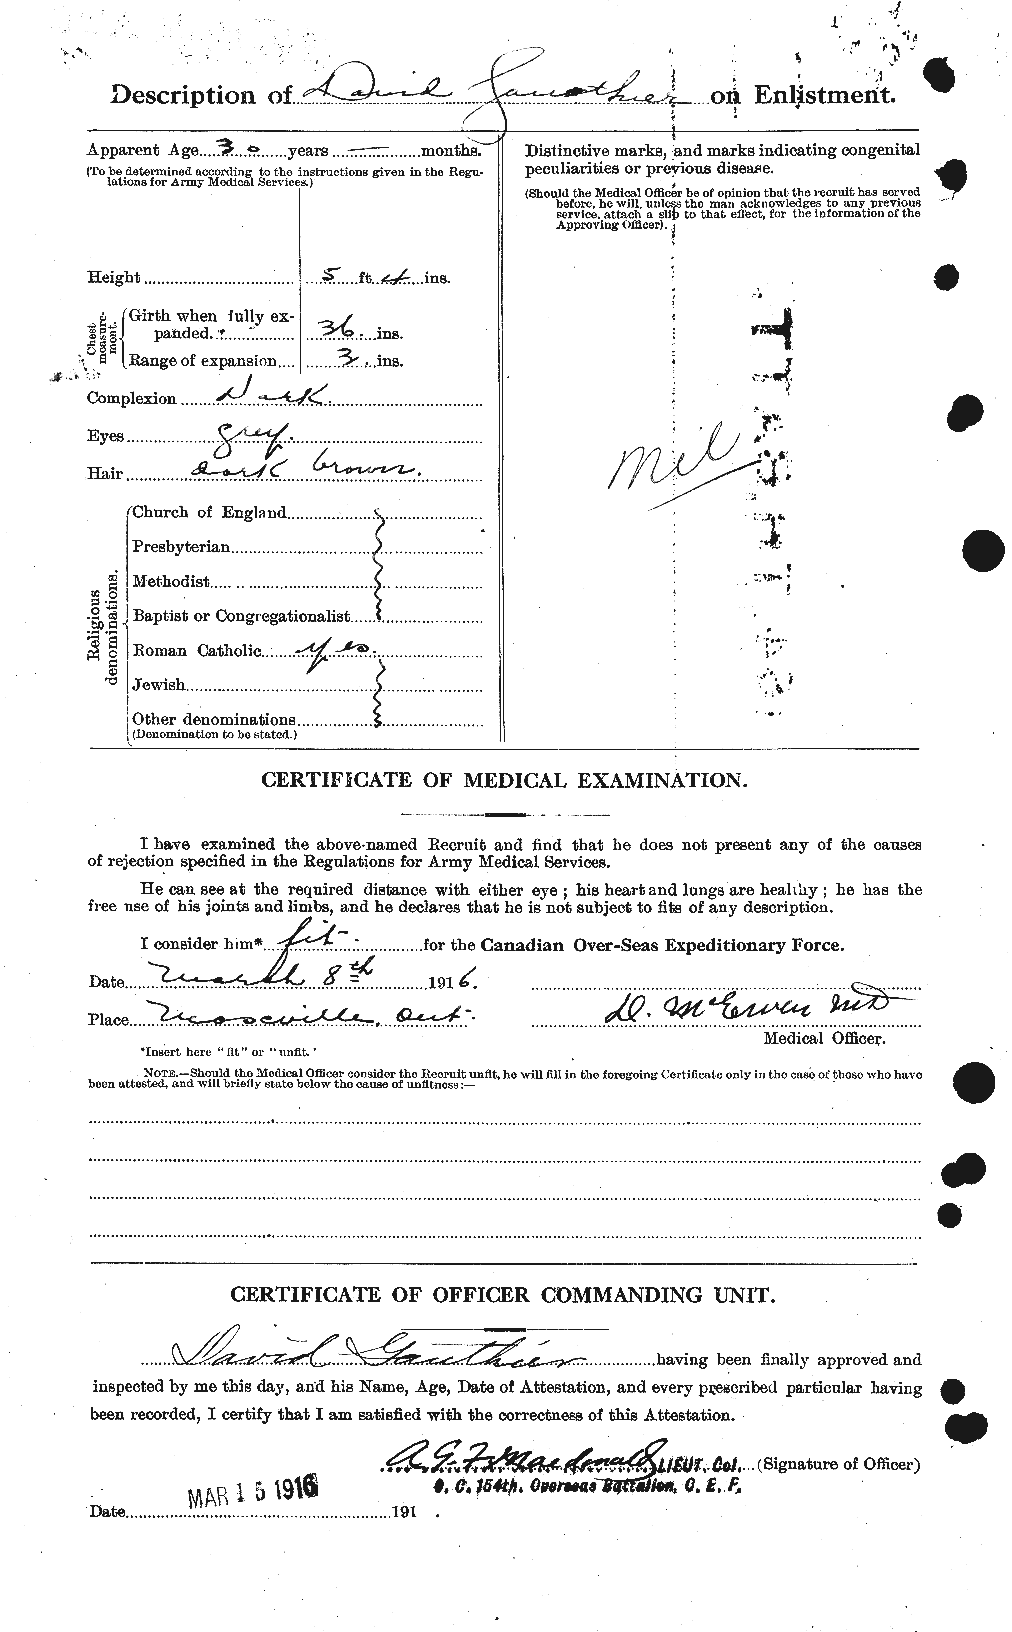 Personnel Records of the First World War - CEF 347685b